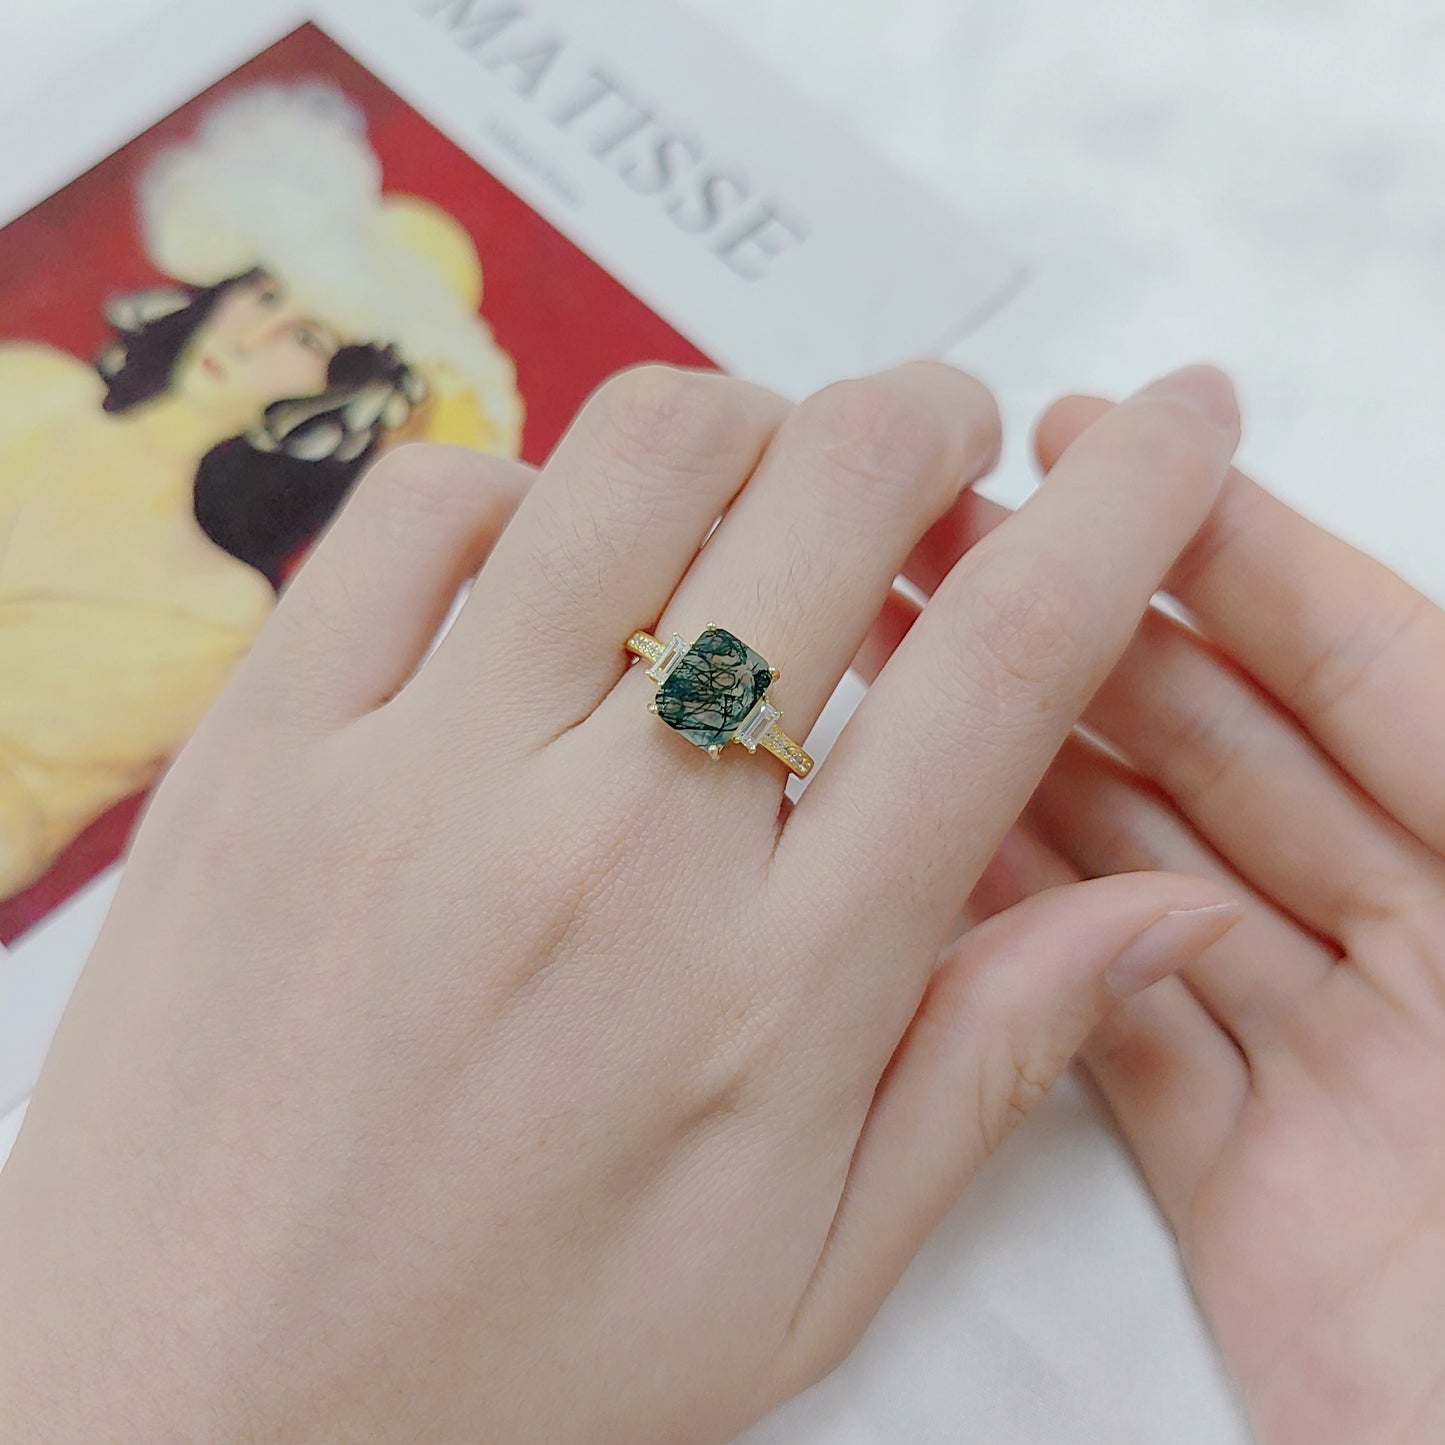 Unique Octagon Cut Moss Agate Stone Ring in Sterling Silver